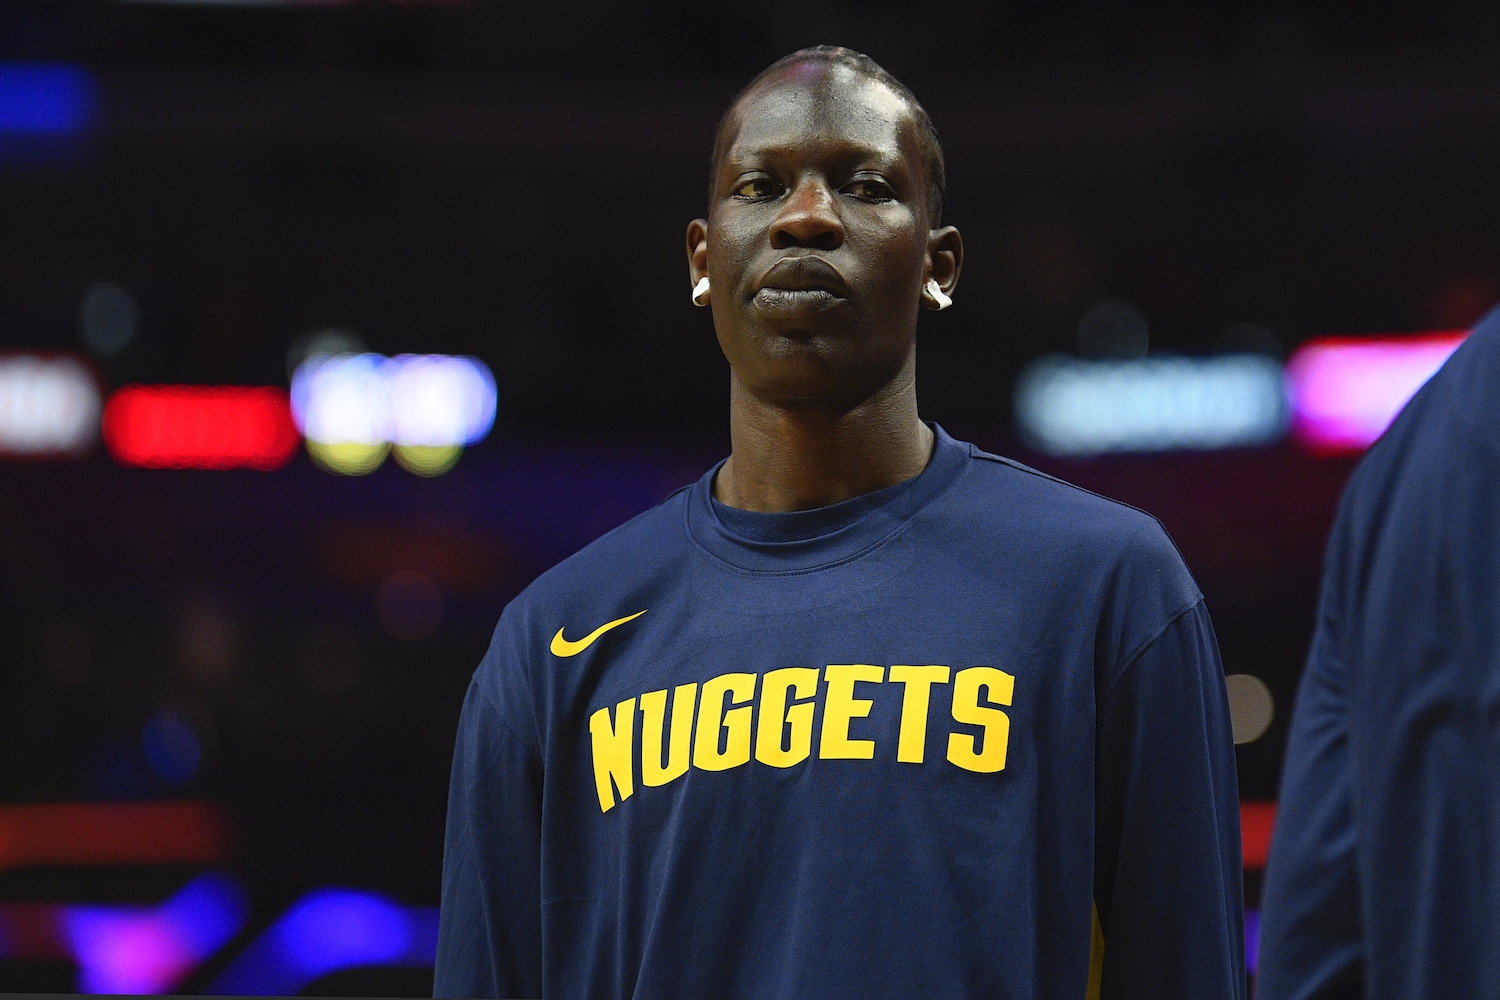 Manute Bol Donated All of His NBA Earnings to Sudanese Charities